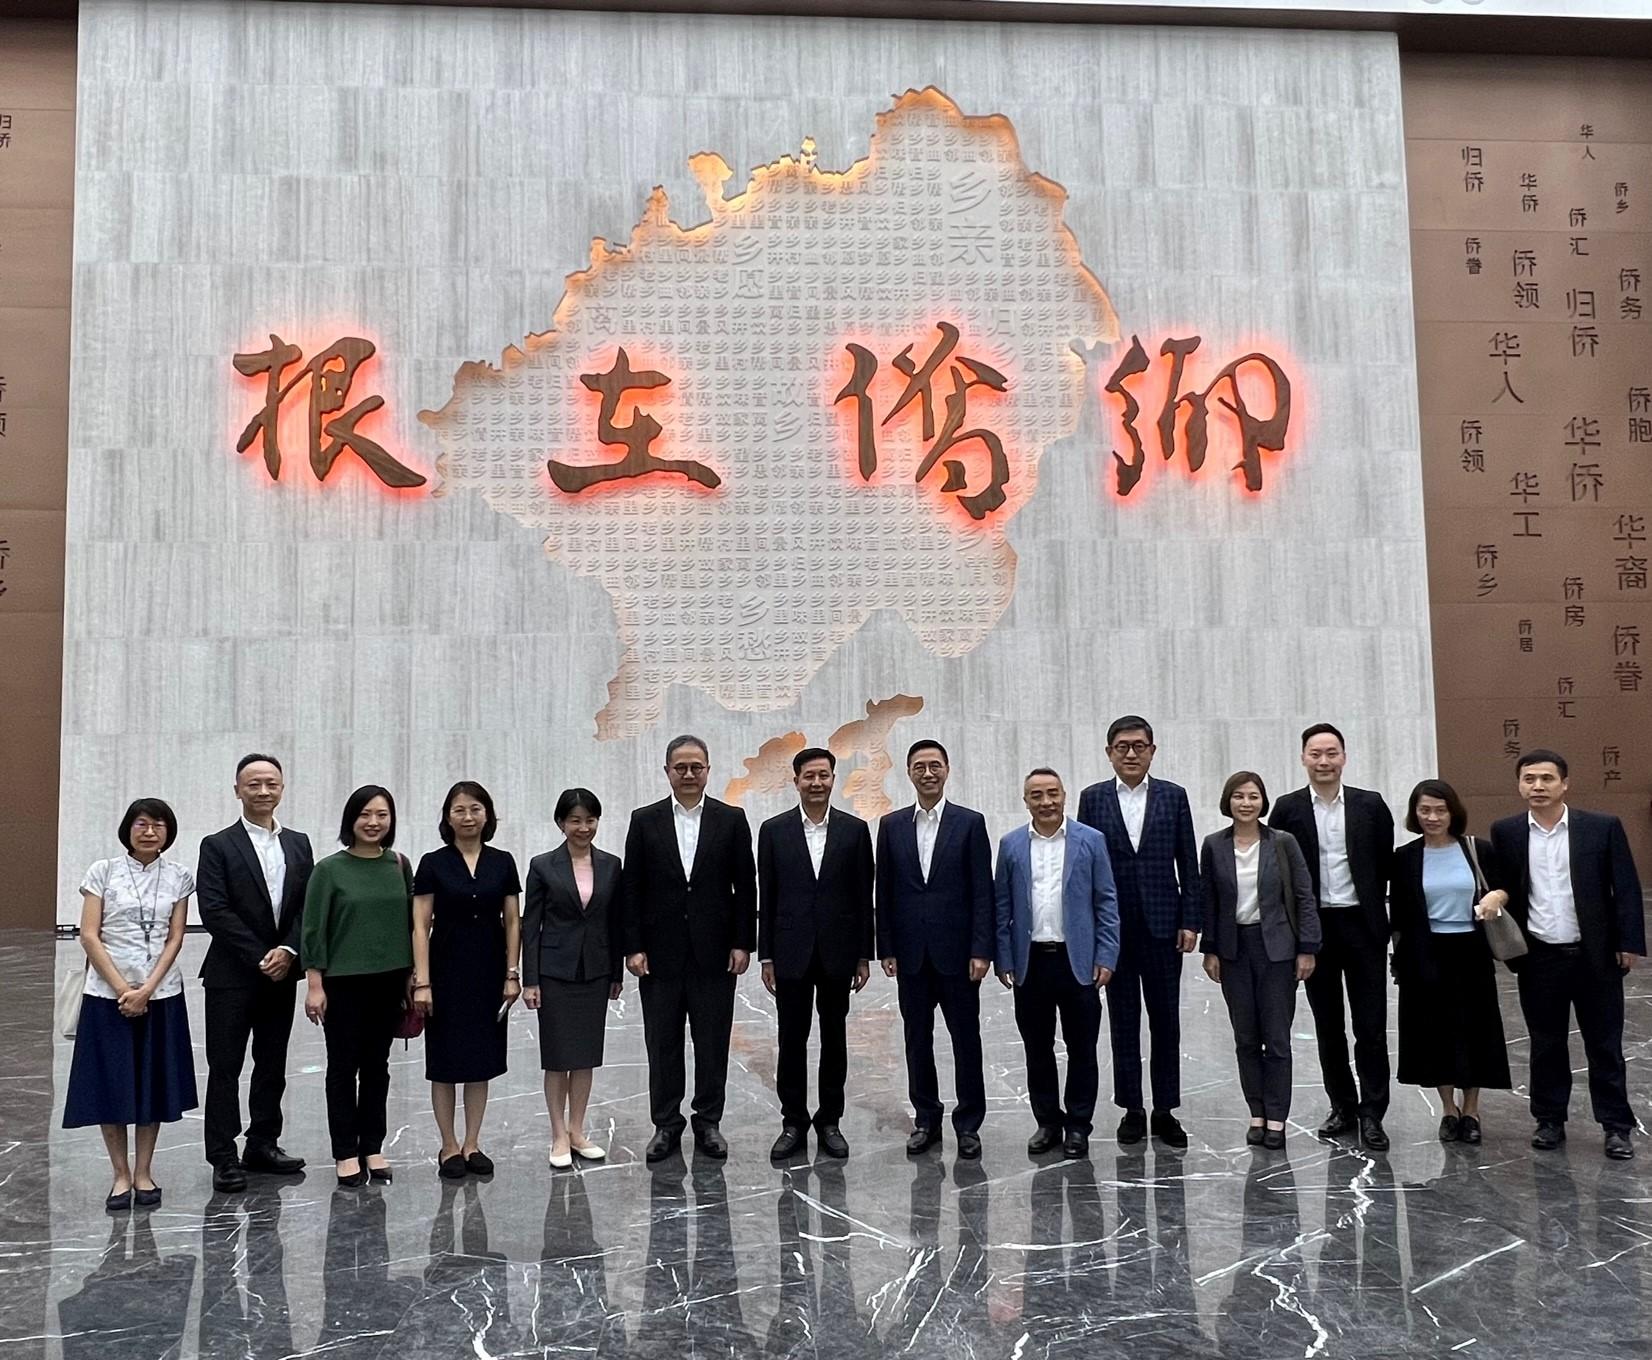 The Secretary for Culture, Sports and Tourism, Mr Kevin Yeung, visited Jiangmen yesterday (August 16). Photo shows Mr Yeung (seventh right); the Permanent Secretary for Culture, Sports and Tourism, Mr Joe Wong (sixth left); the Commissioner for Tourism, Ms Vivian Sum (fifth left); Vice Mayor of the Jiangmen Municipal People's Government Mr Lin Jiansheng (seventh left); Deputy Secretary of the Jiangmen Municipal People's Government Ms Liang Linghua (fourth left); and the Director of the Jiangmen Municipal Bureau of Culture, Radio, Television, Tourism and Sports, Mr Kuang Jikang (sixth right).